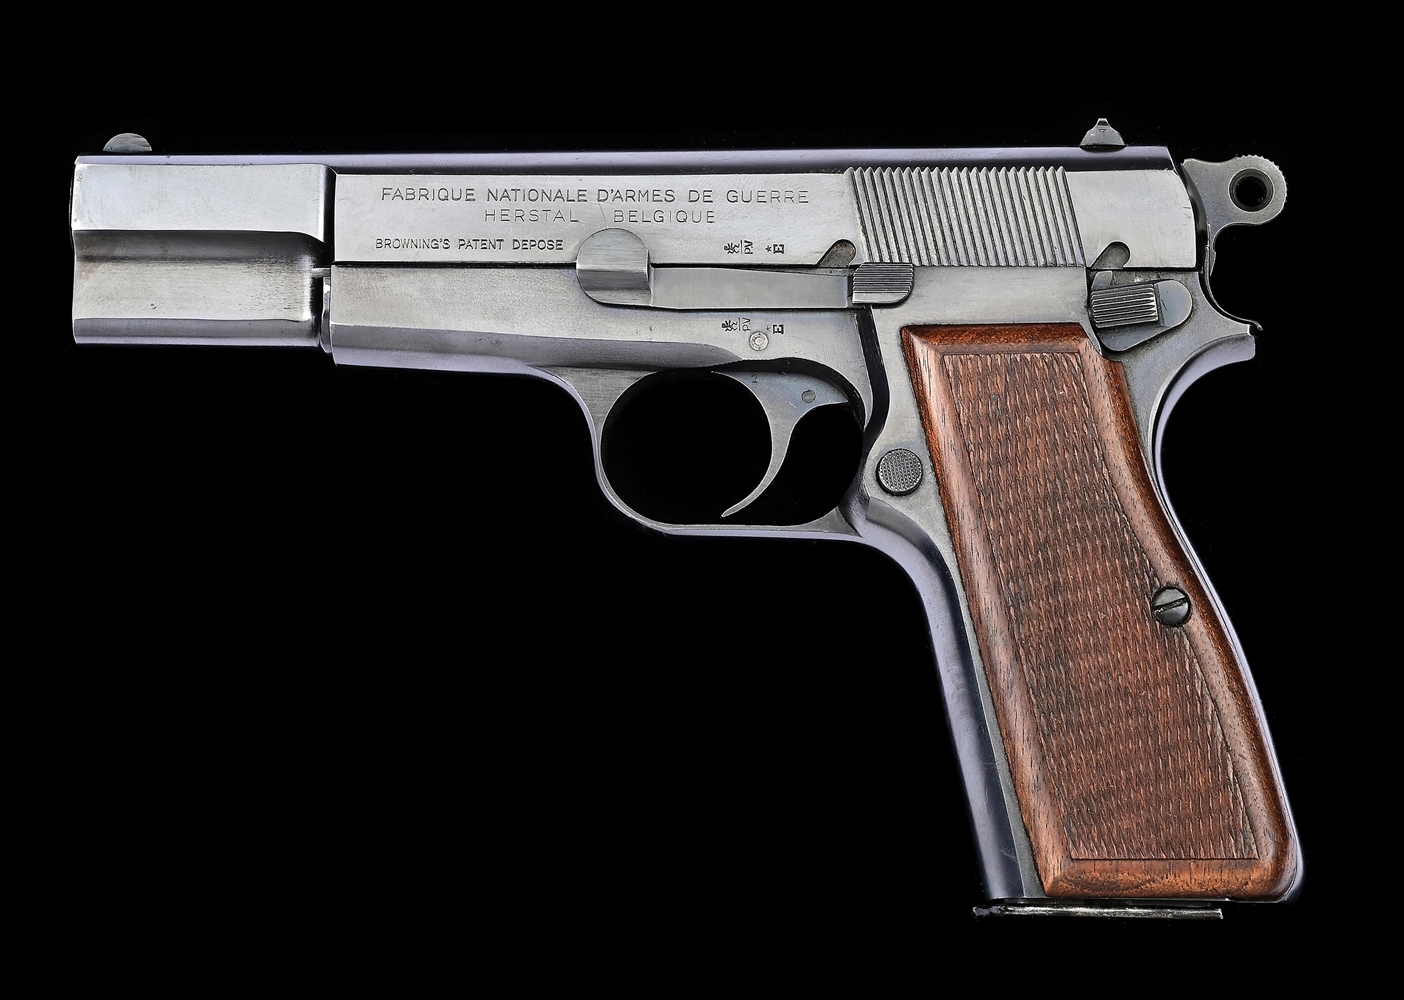 (C) FINE EARLY POST-WAR FABRIQUE NATIONALE BROWNING HI POWER SEMI-AUTOMATIC PISTOL.